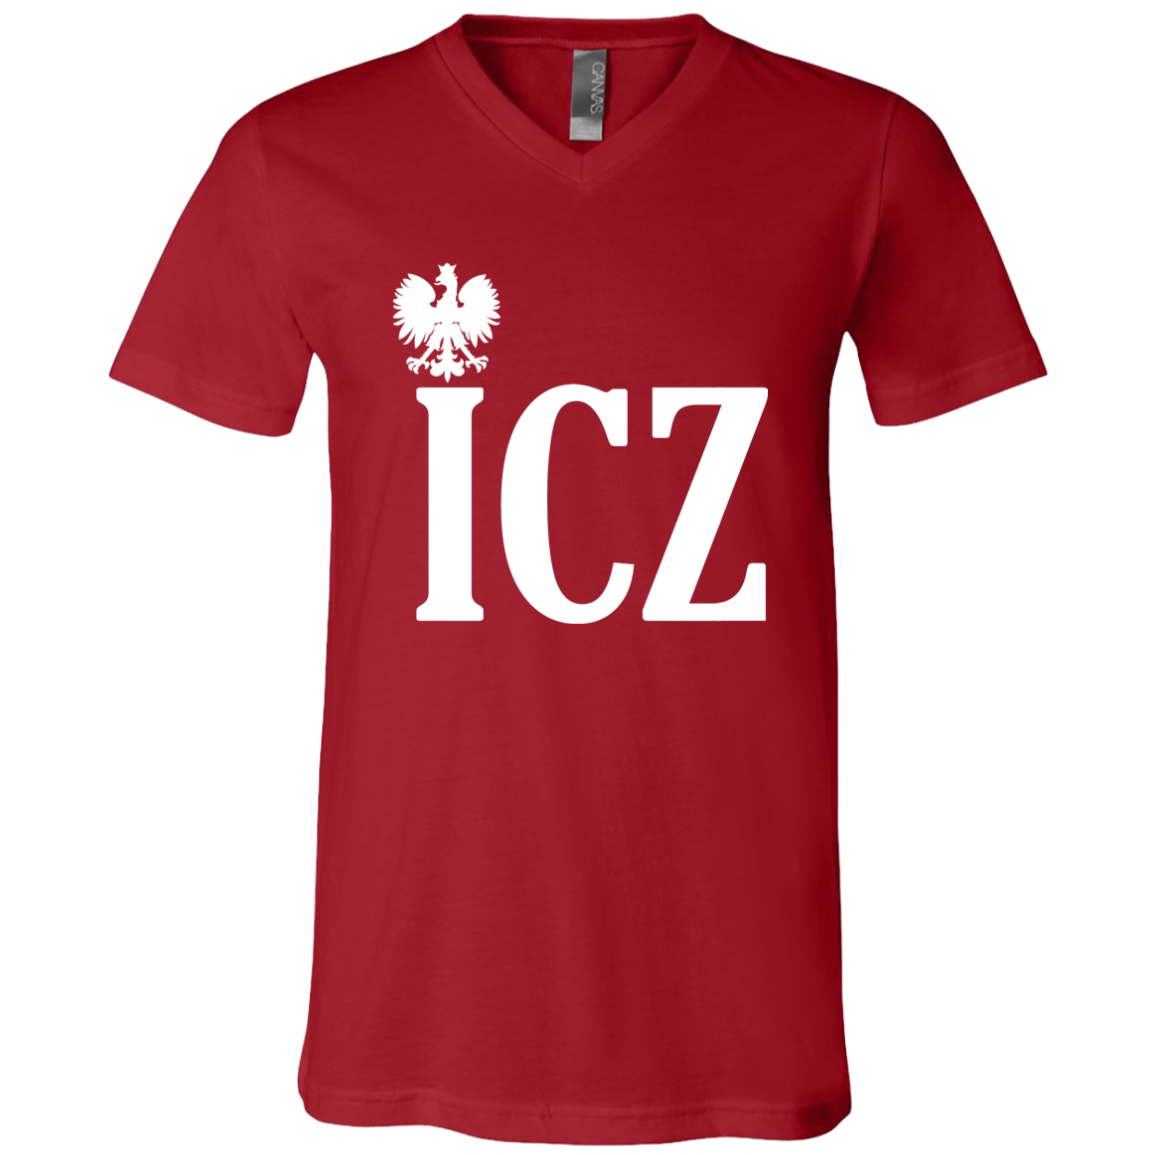 ICZ Polish Surname Ending Apparel CustomCat 3005 Unisex Jersey SS V-Neck T-Shirt Canvas Red X-Small